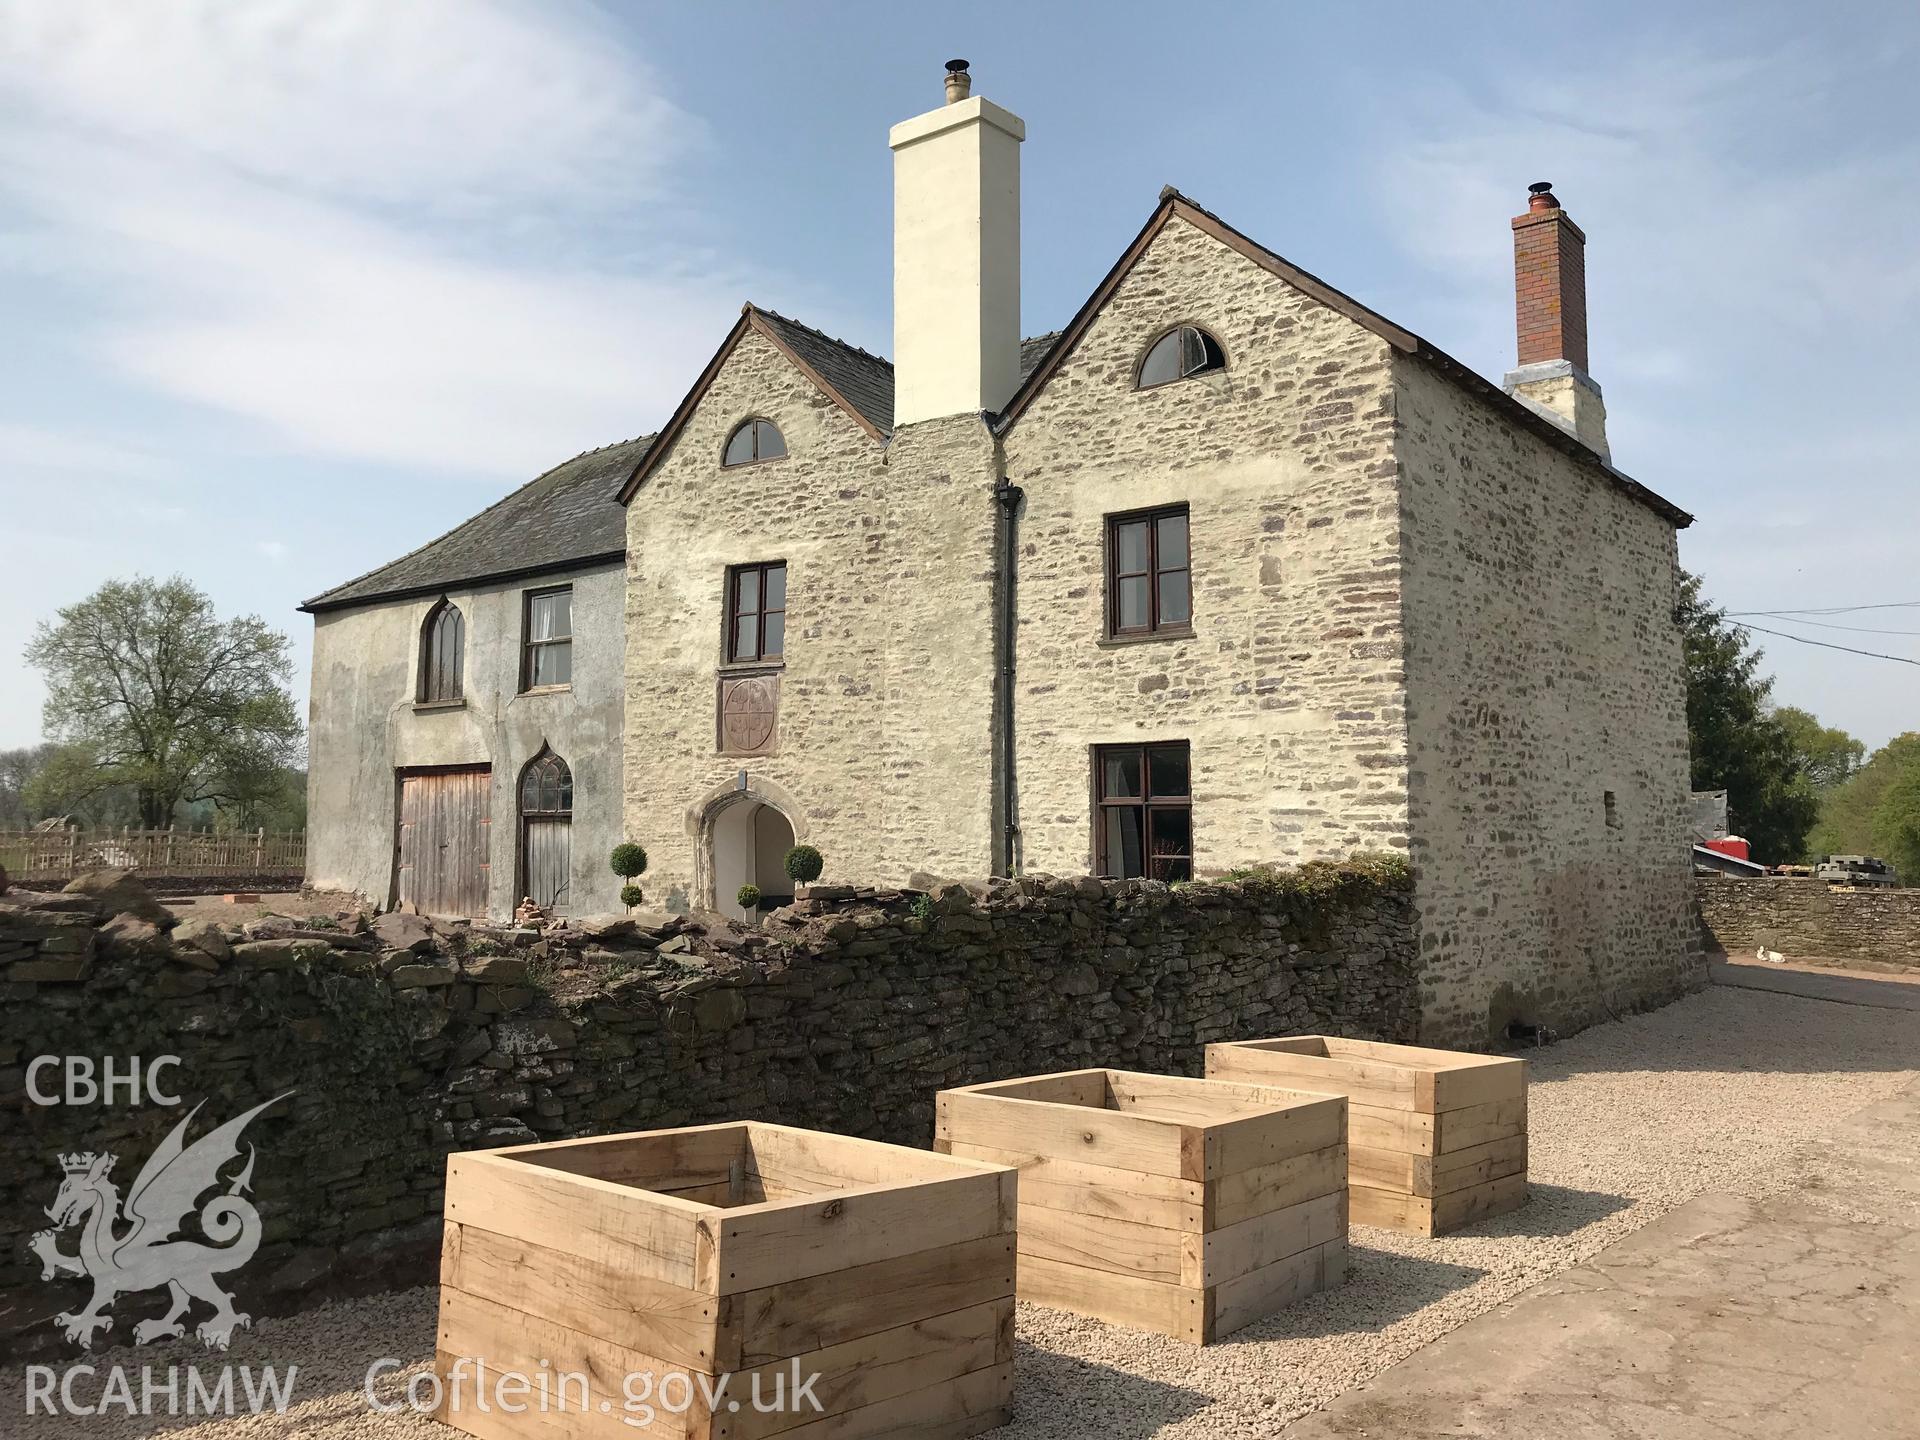 Digital colour photograph showing exterior view of College Farmhouse, Trefecca, Talgarth, taken by Paul R. Davis on 22nd April 2019.